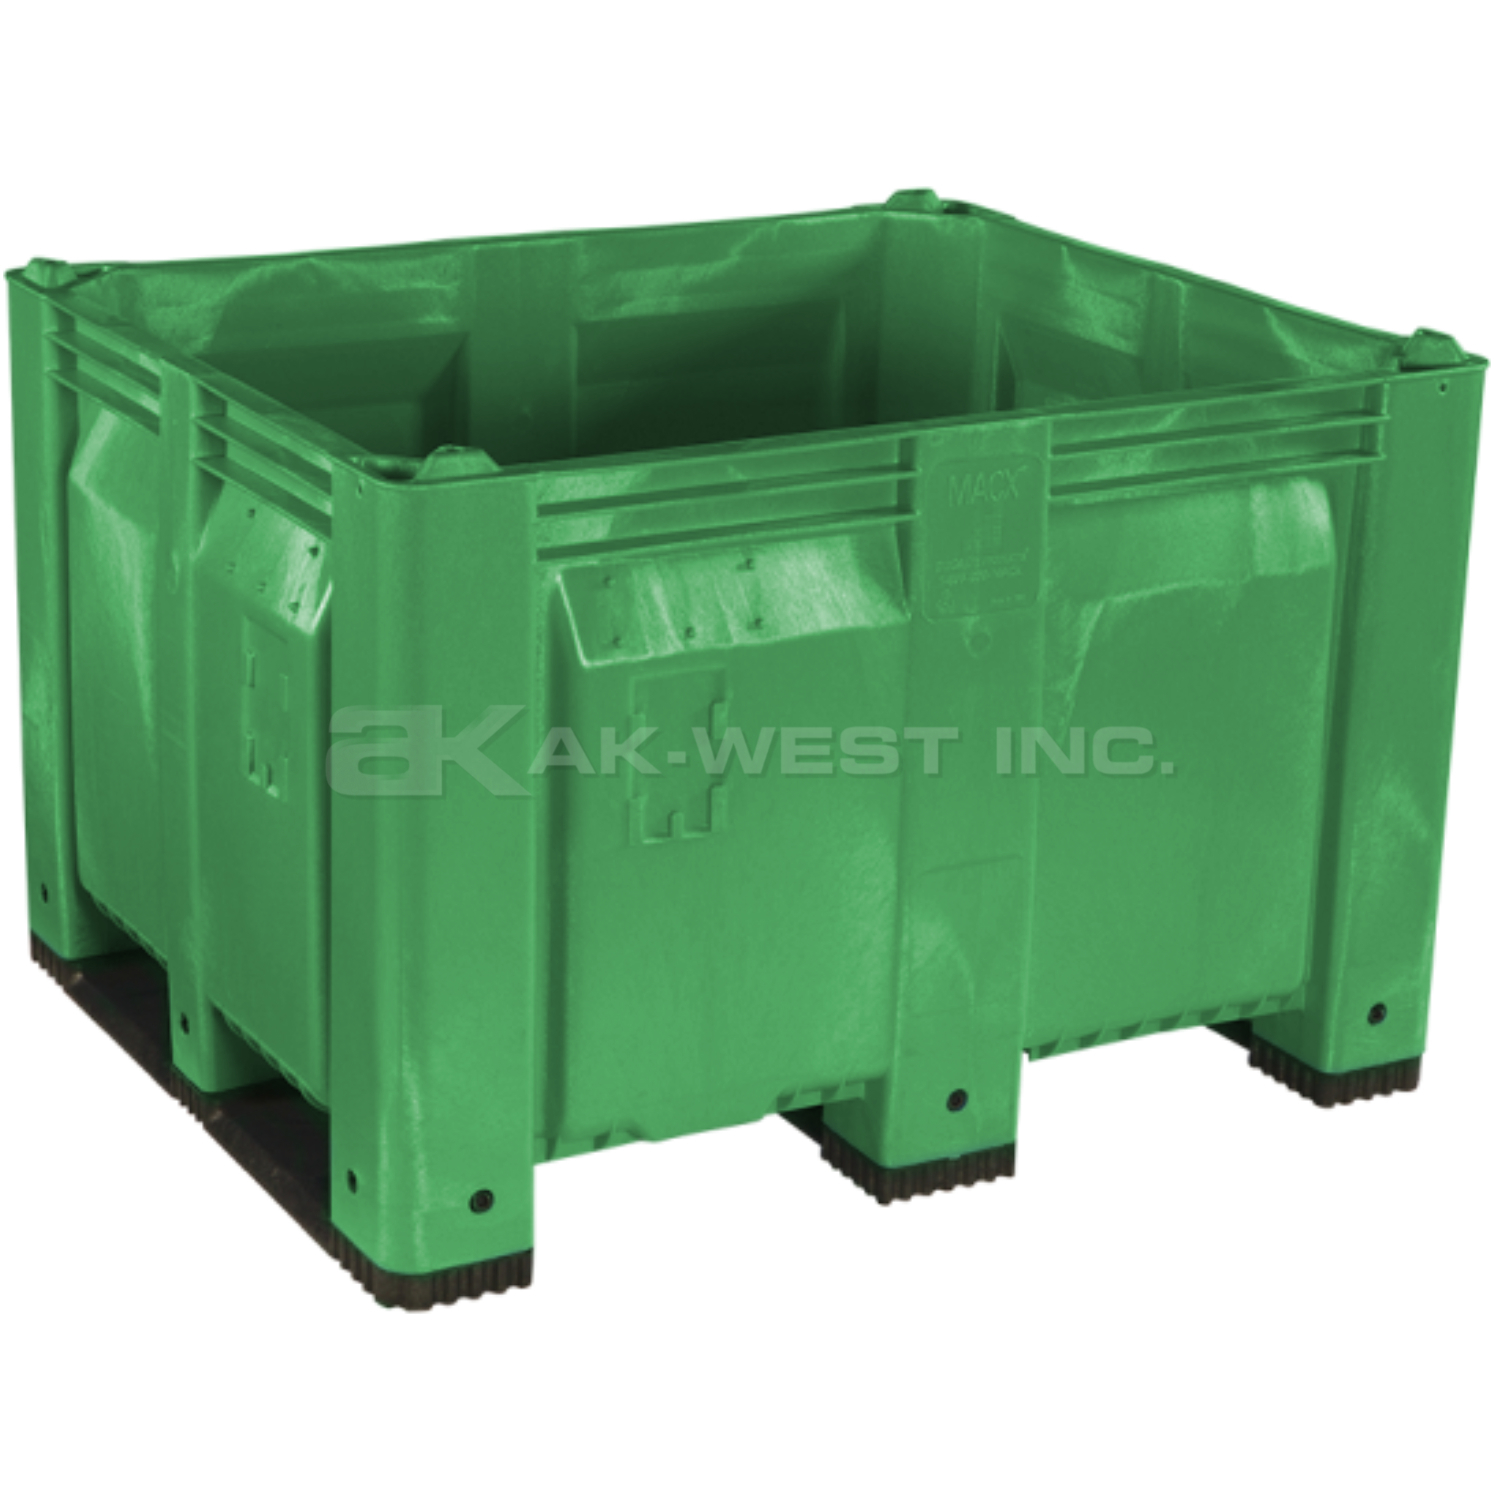 Green, 48"L x 40"W x 31"H Bulk Container w/ Solid Sides, Short Side Runners